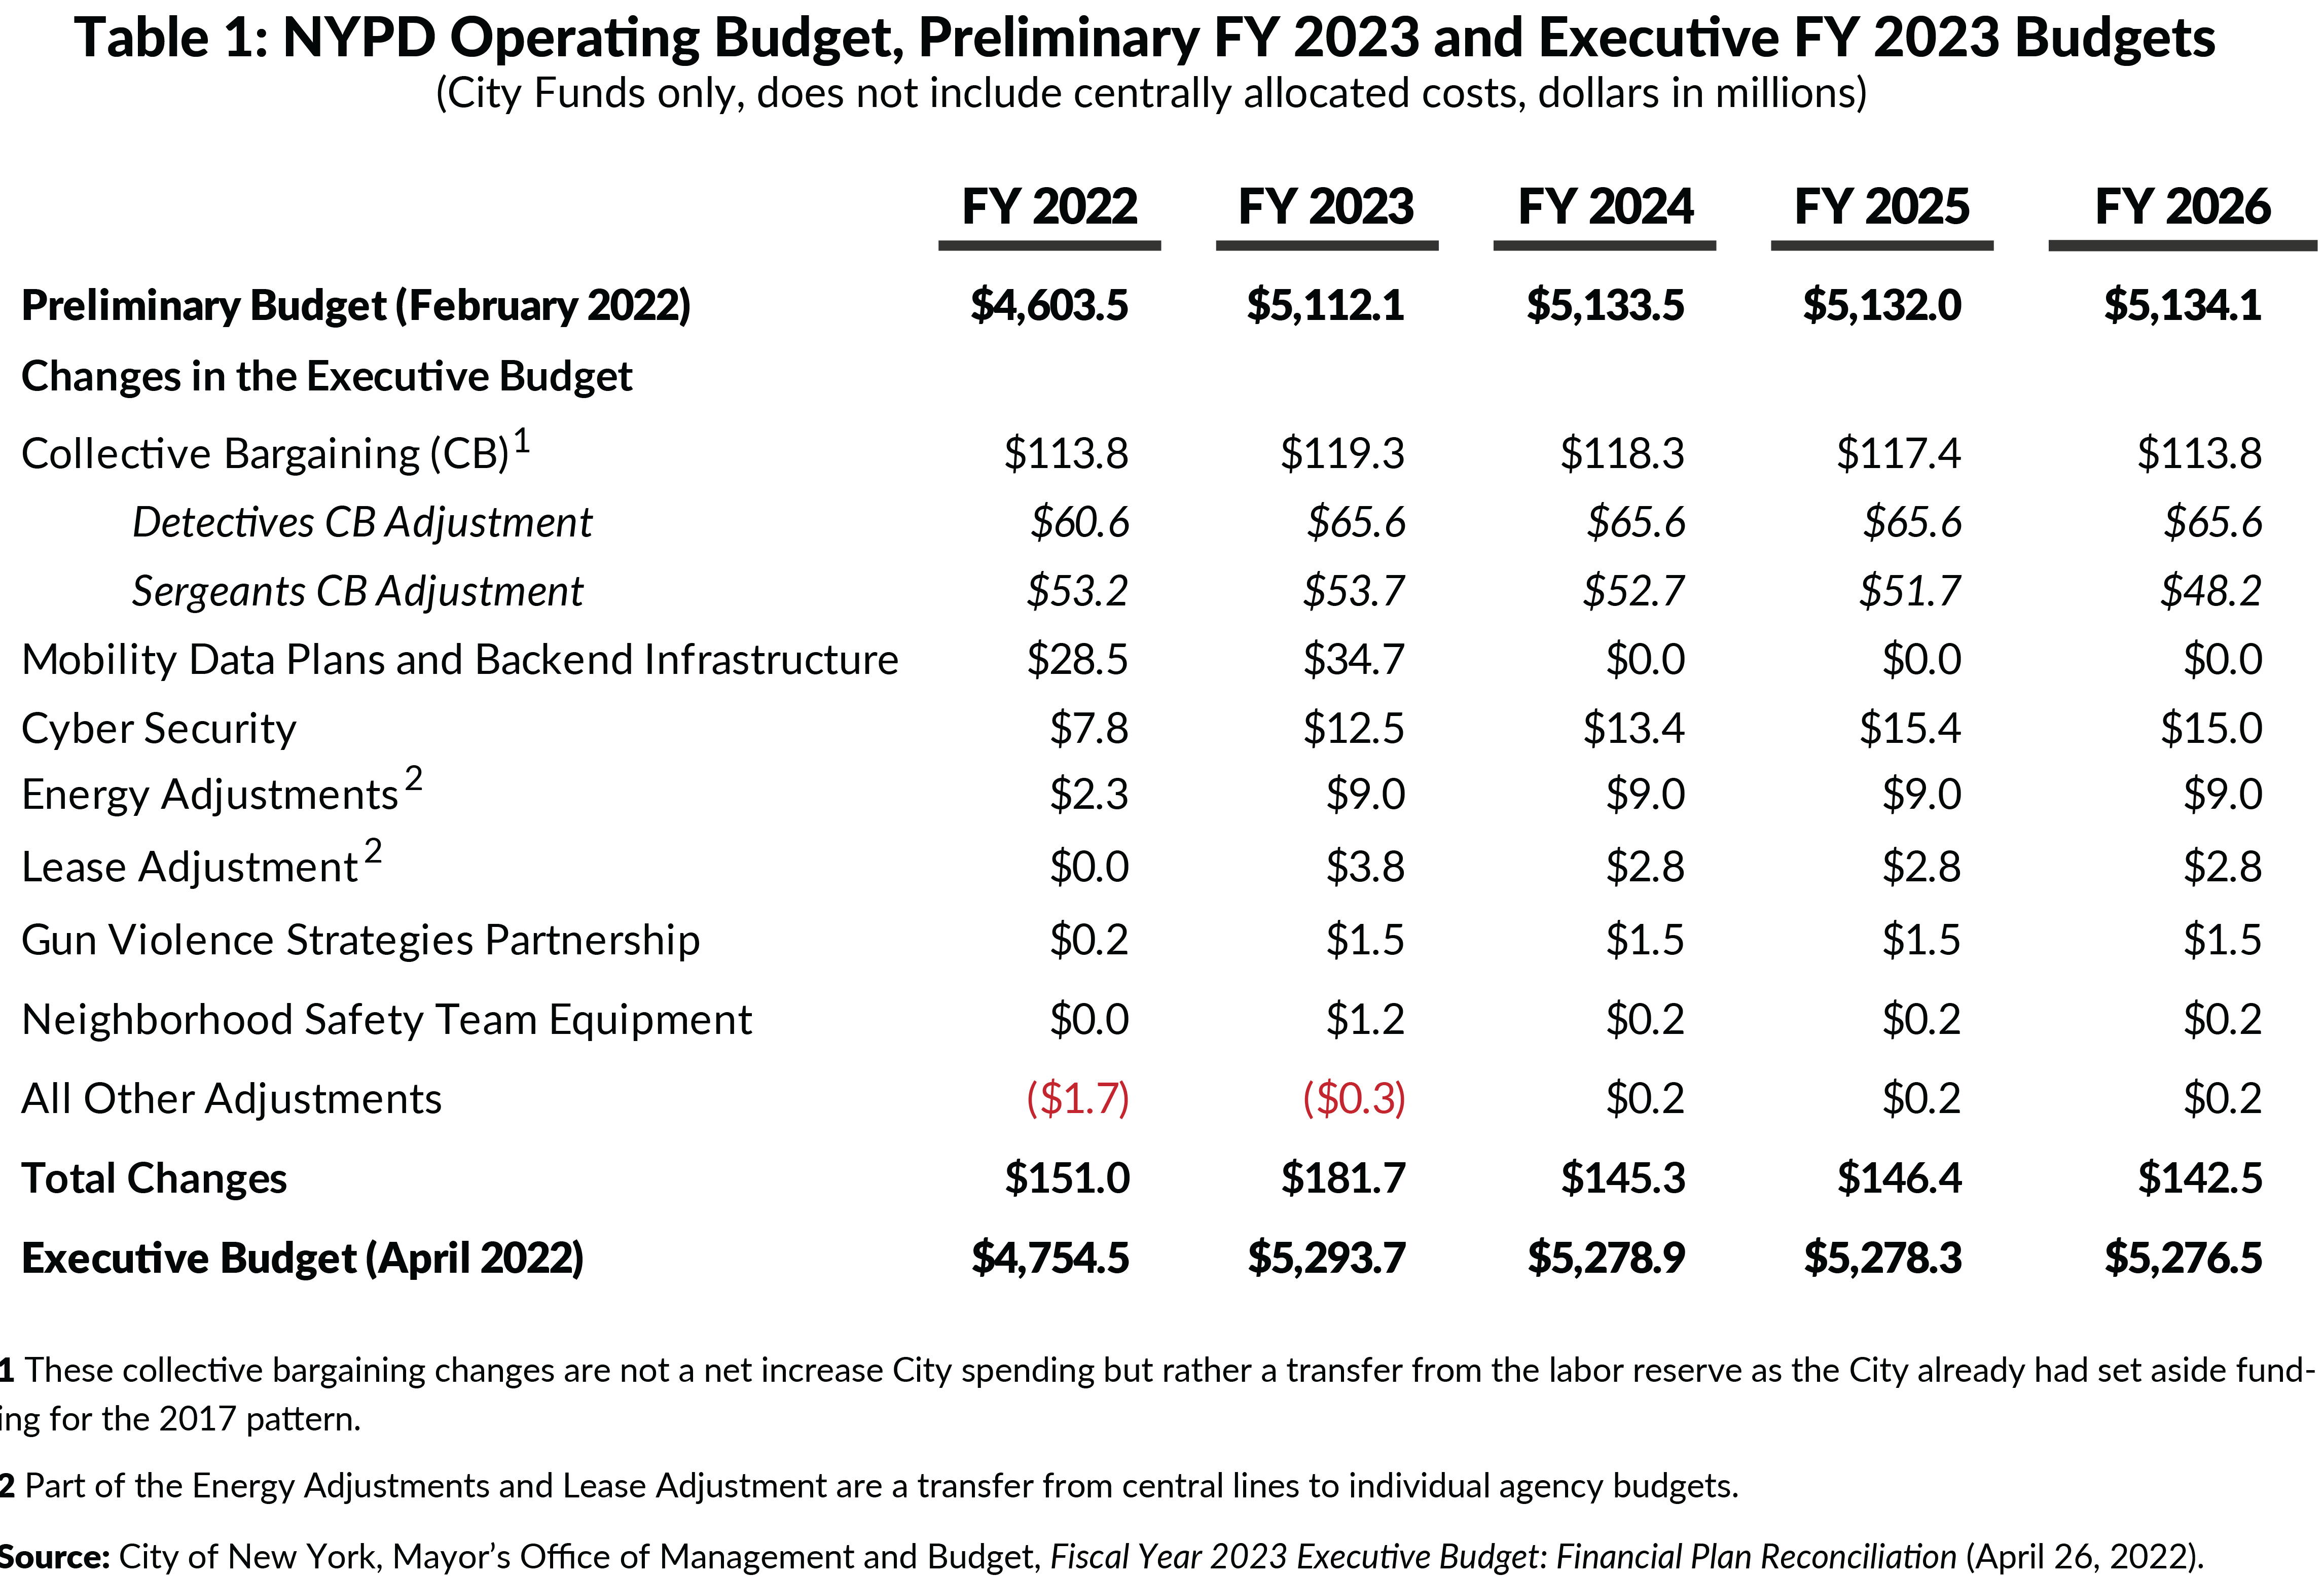 Table 1: NYPD Operating Budget, Preliminary FY 2023 and Executive FY 2023 Budgets